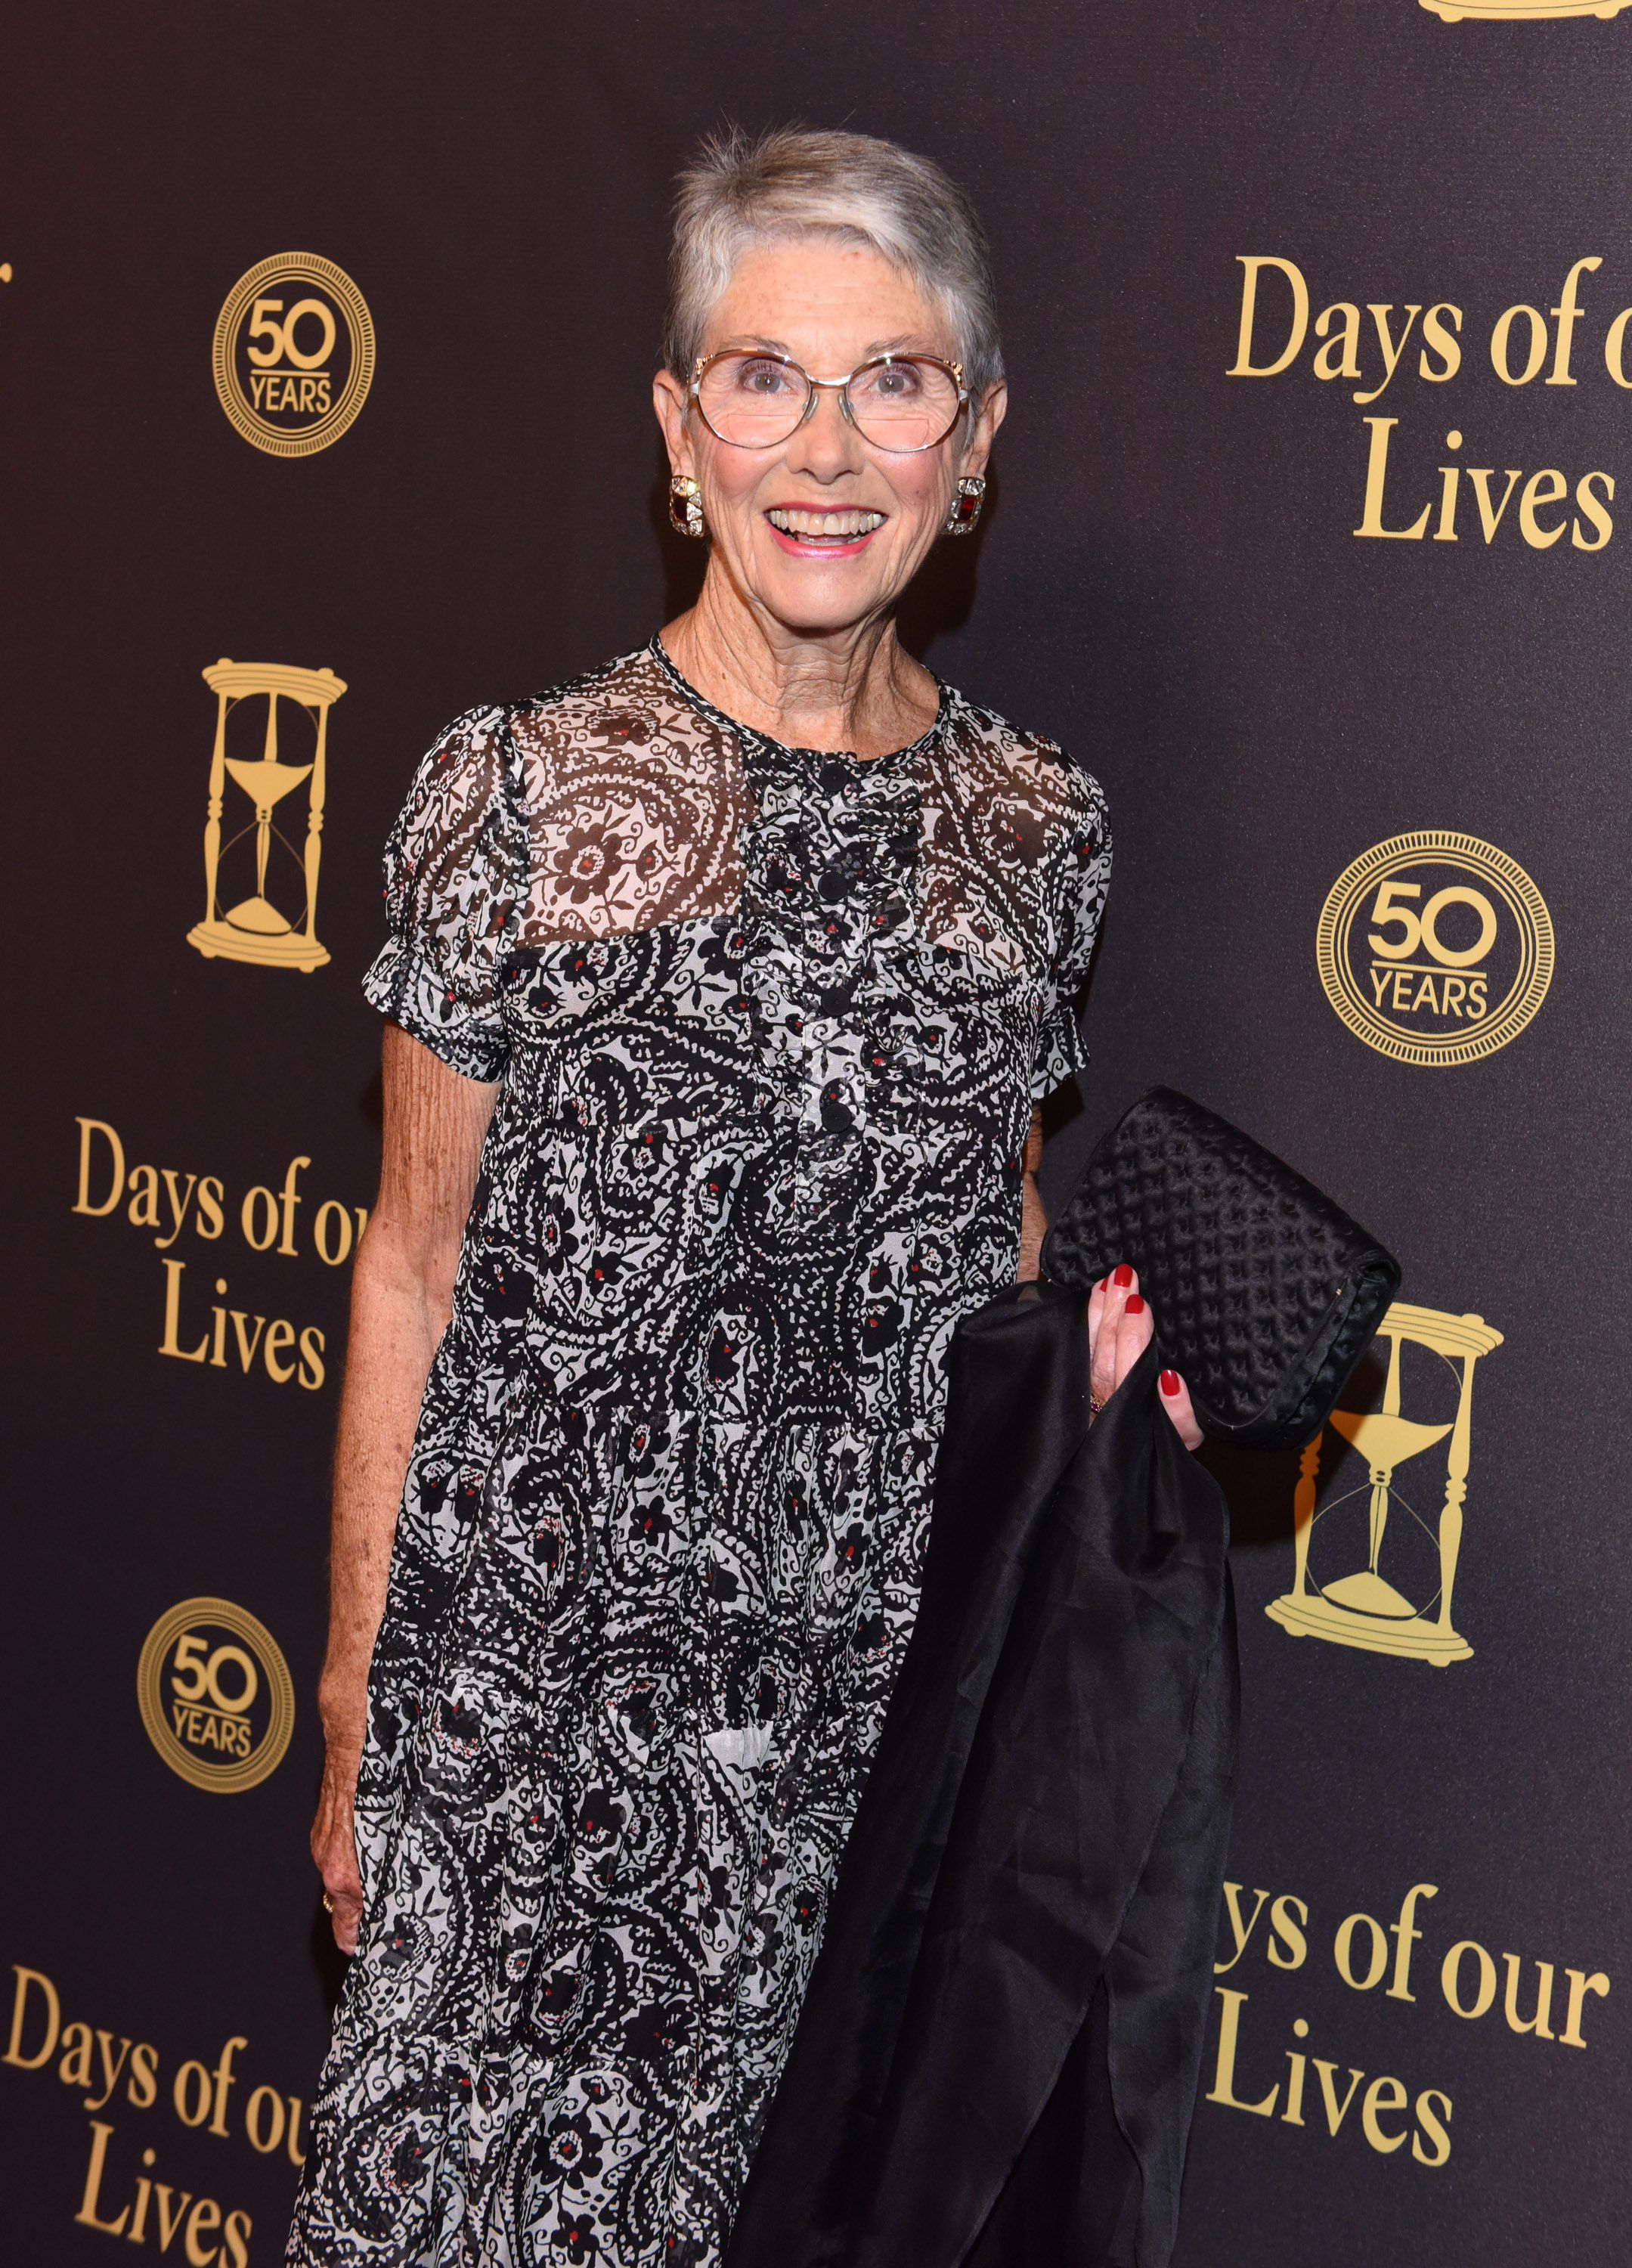 Actress Elinor Donahue at the Days Of Our Lives' 50th Anniversary Celebration at Hollywood Palladium on November 7, 2015 | Photo: Getty Images